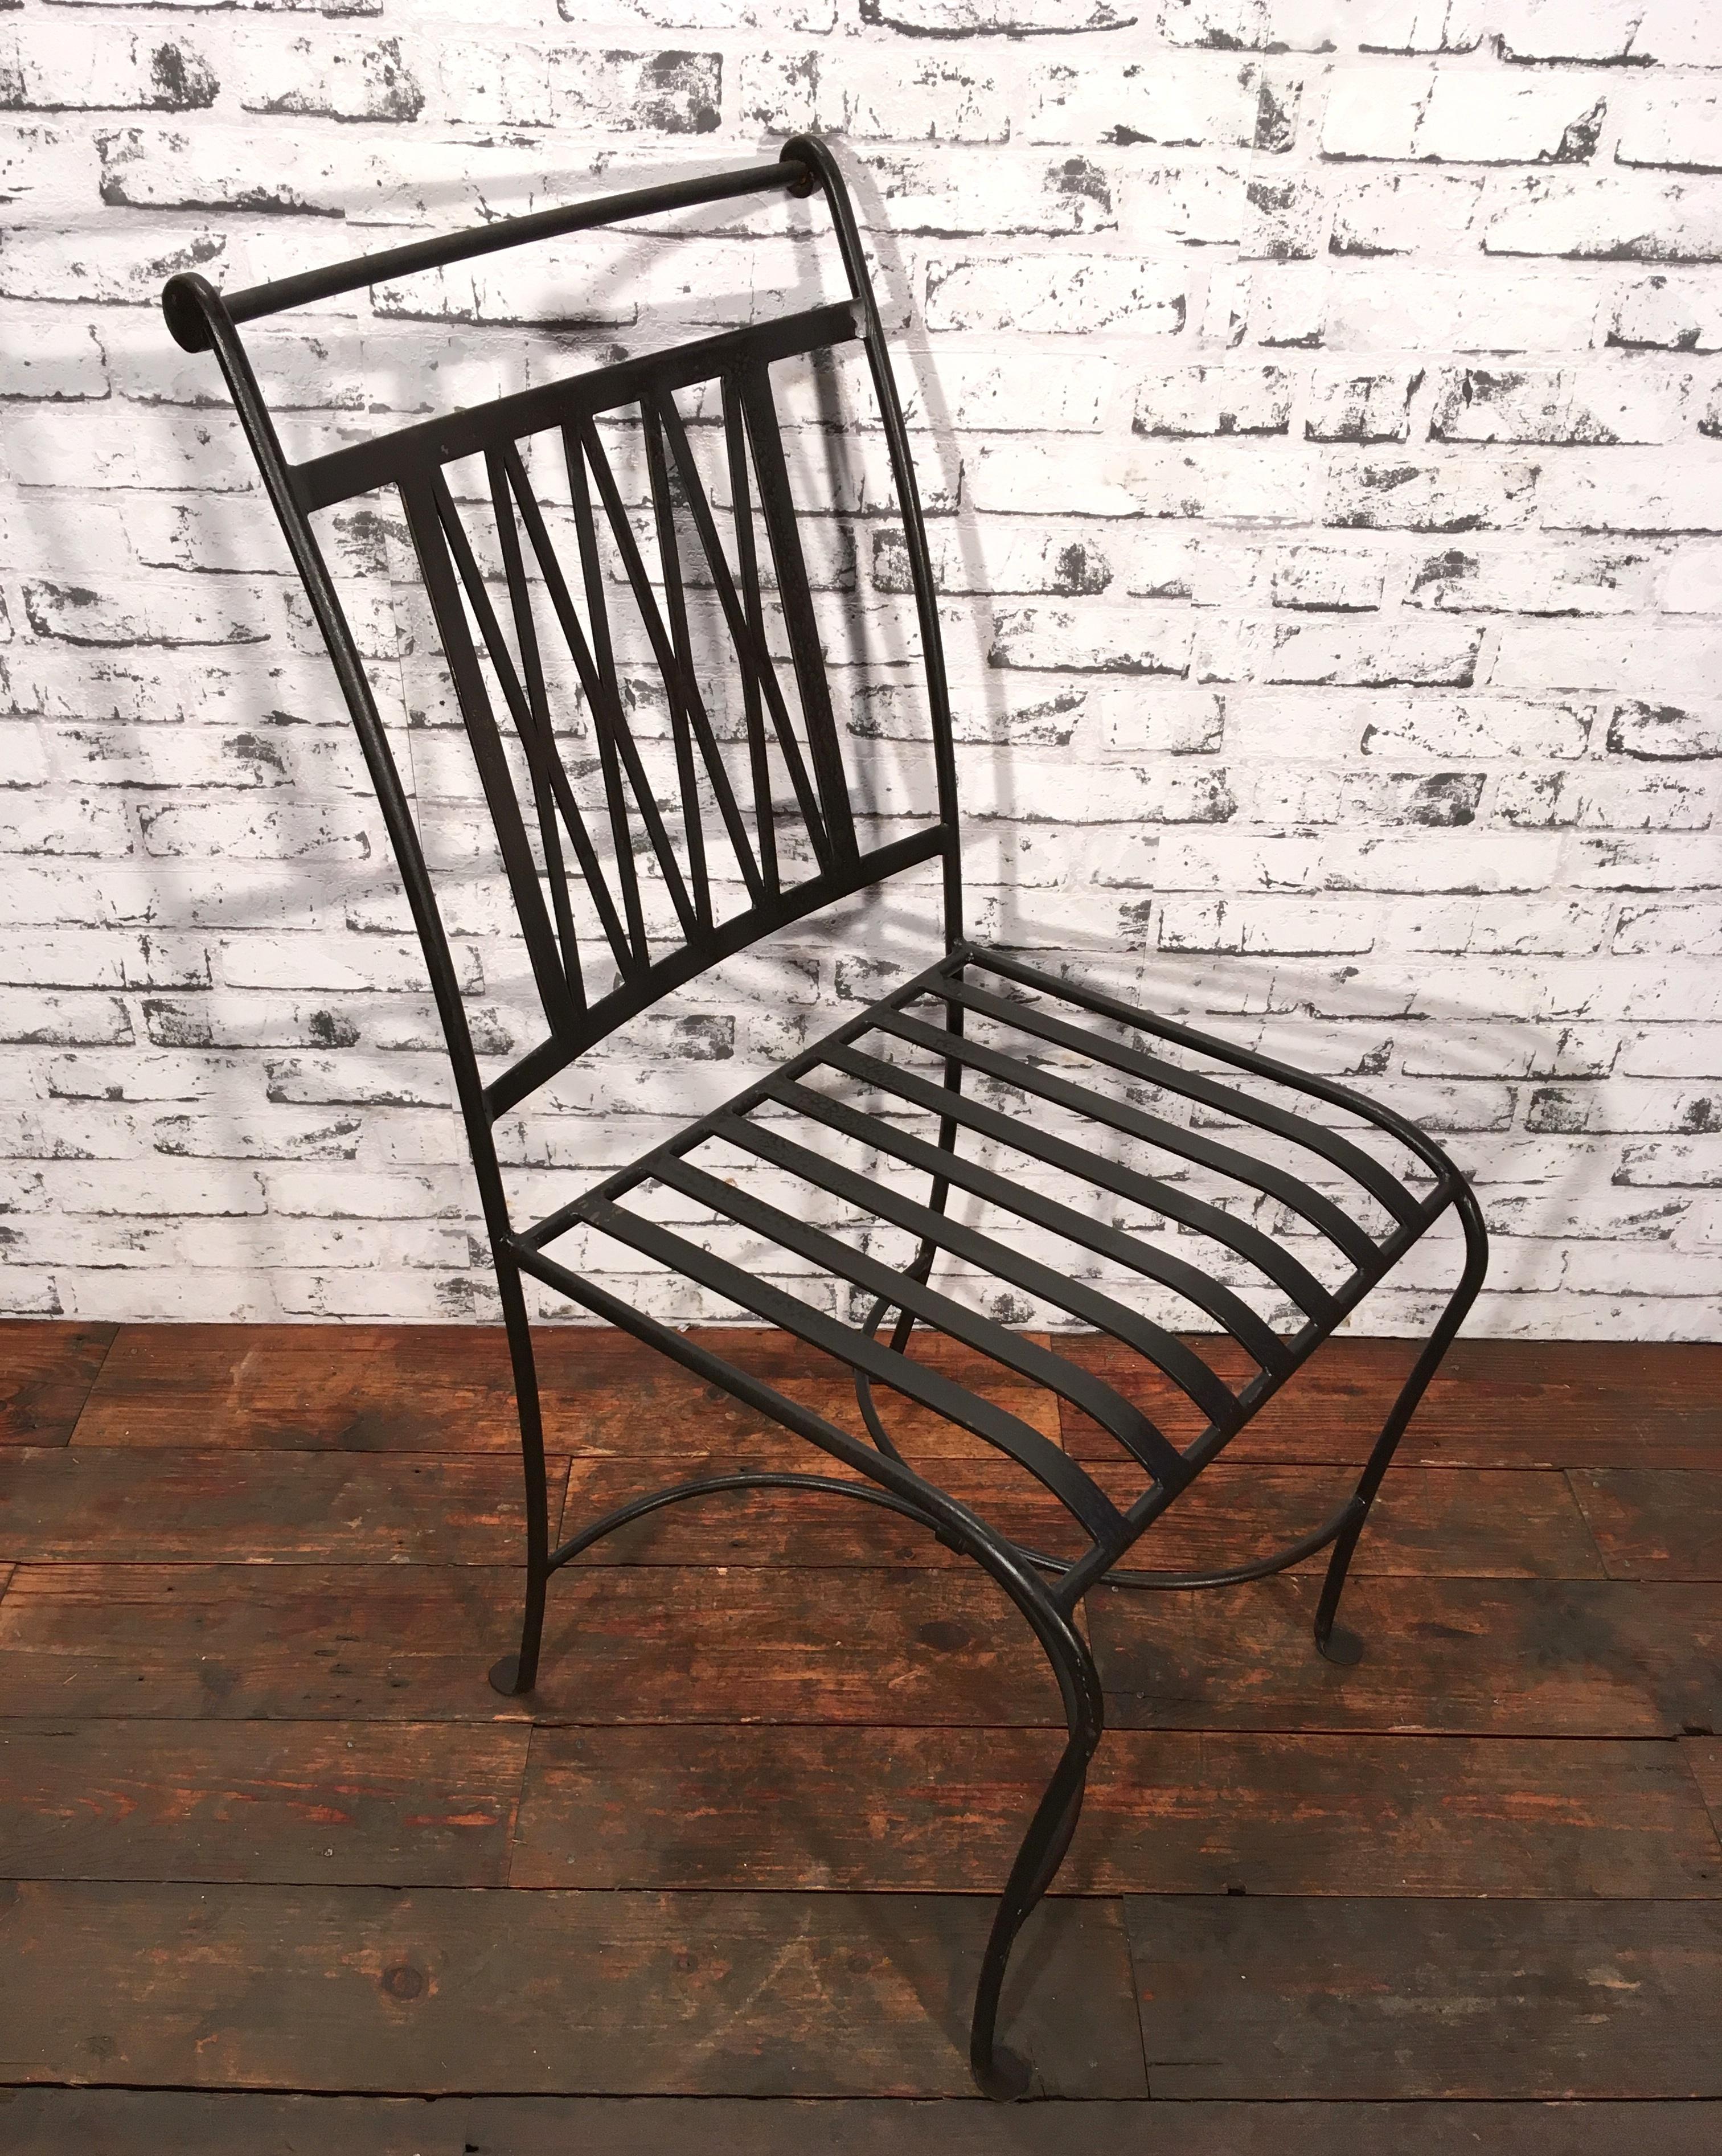 Vintage iron chair made by an art blacksmith during the 1930s.
Weight of the chair is 7 kg.
Dimensions of the seat: 42 x 37 cm.